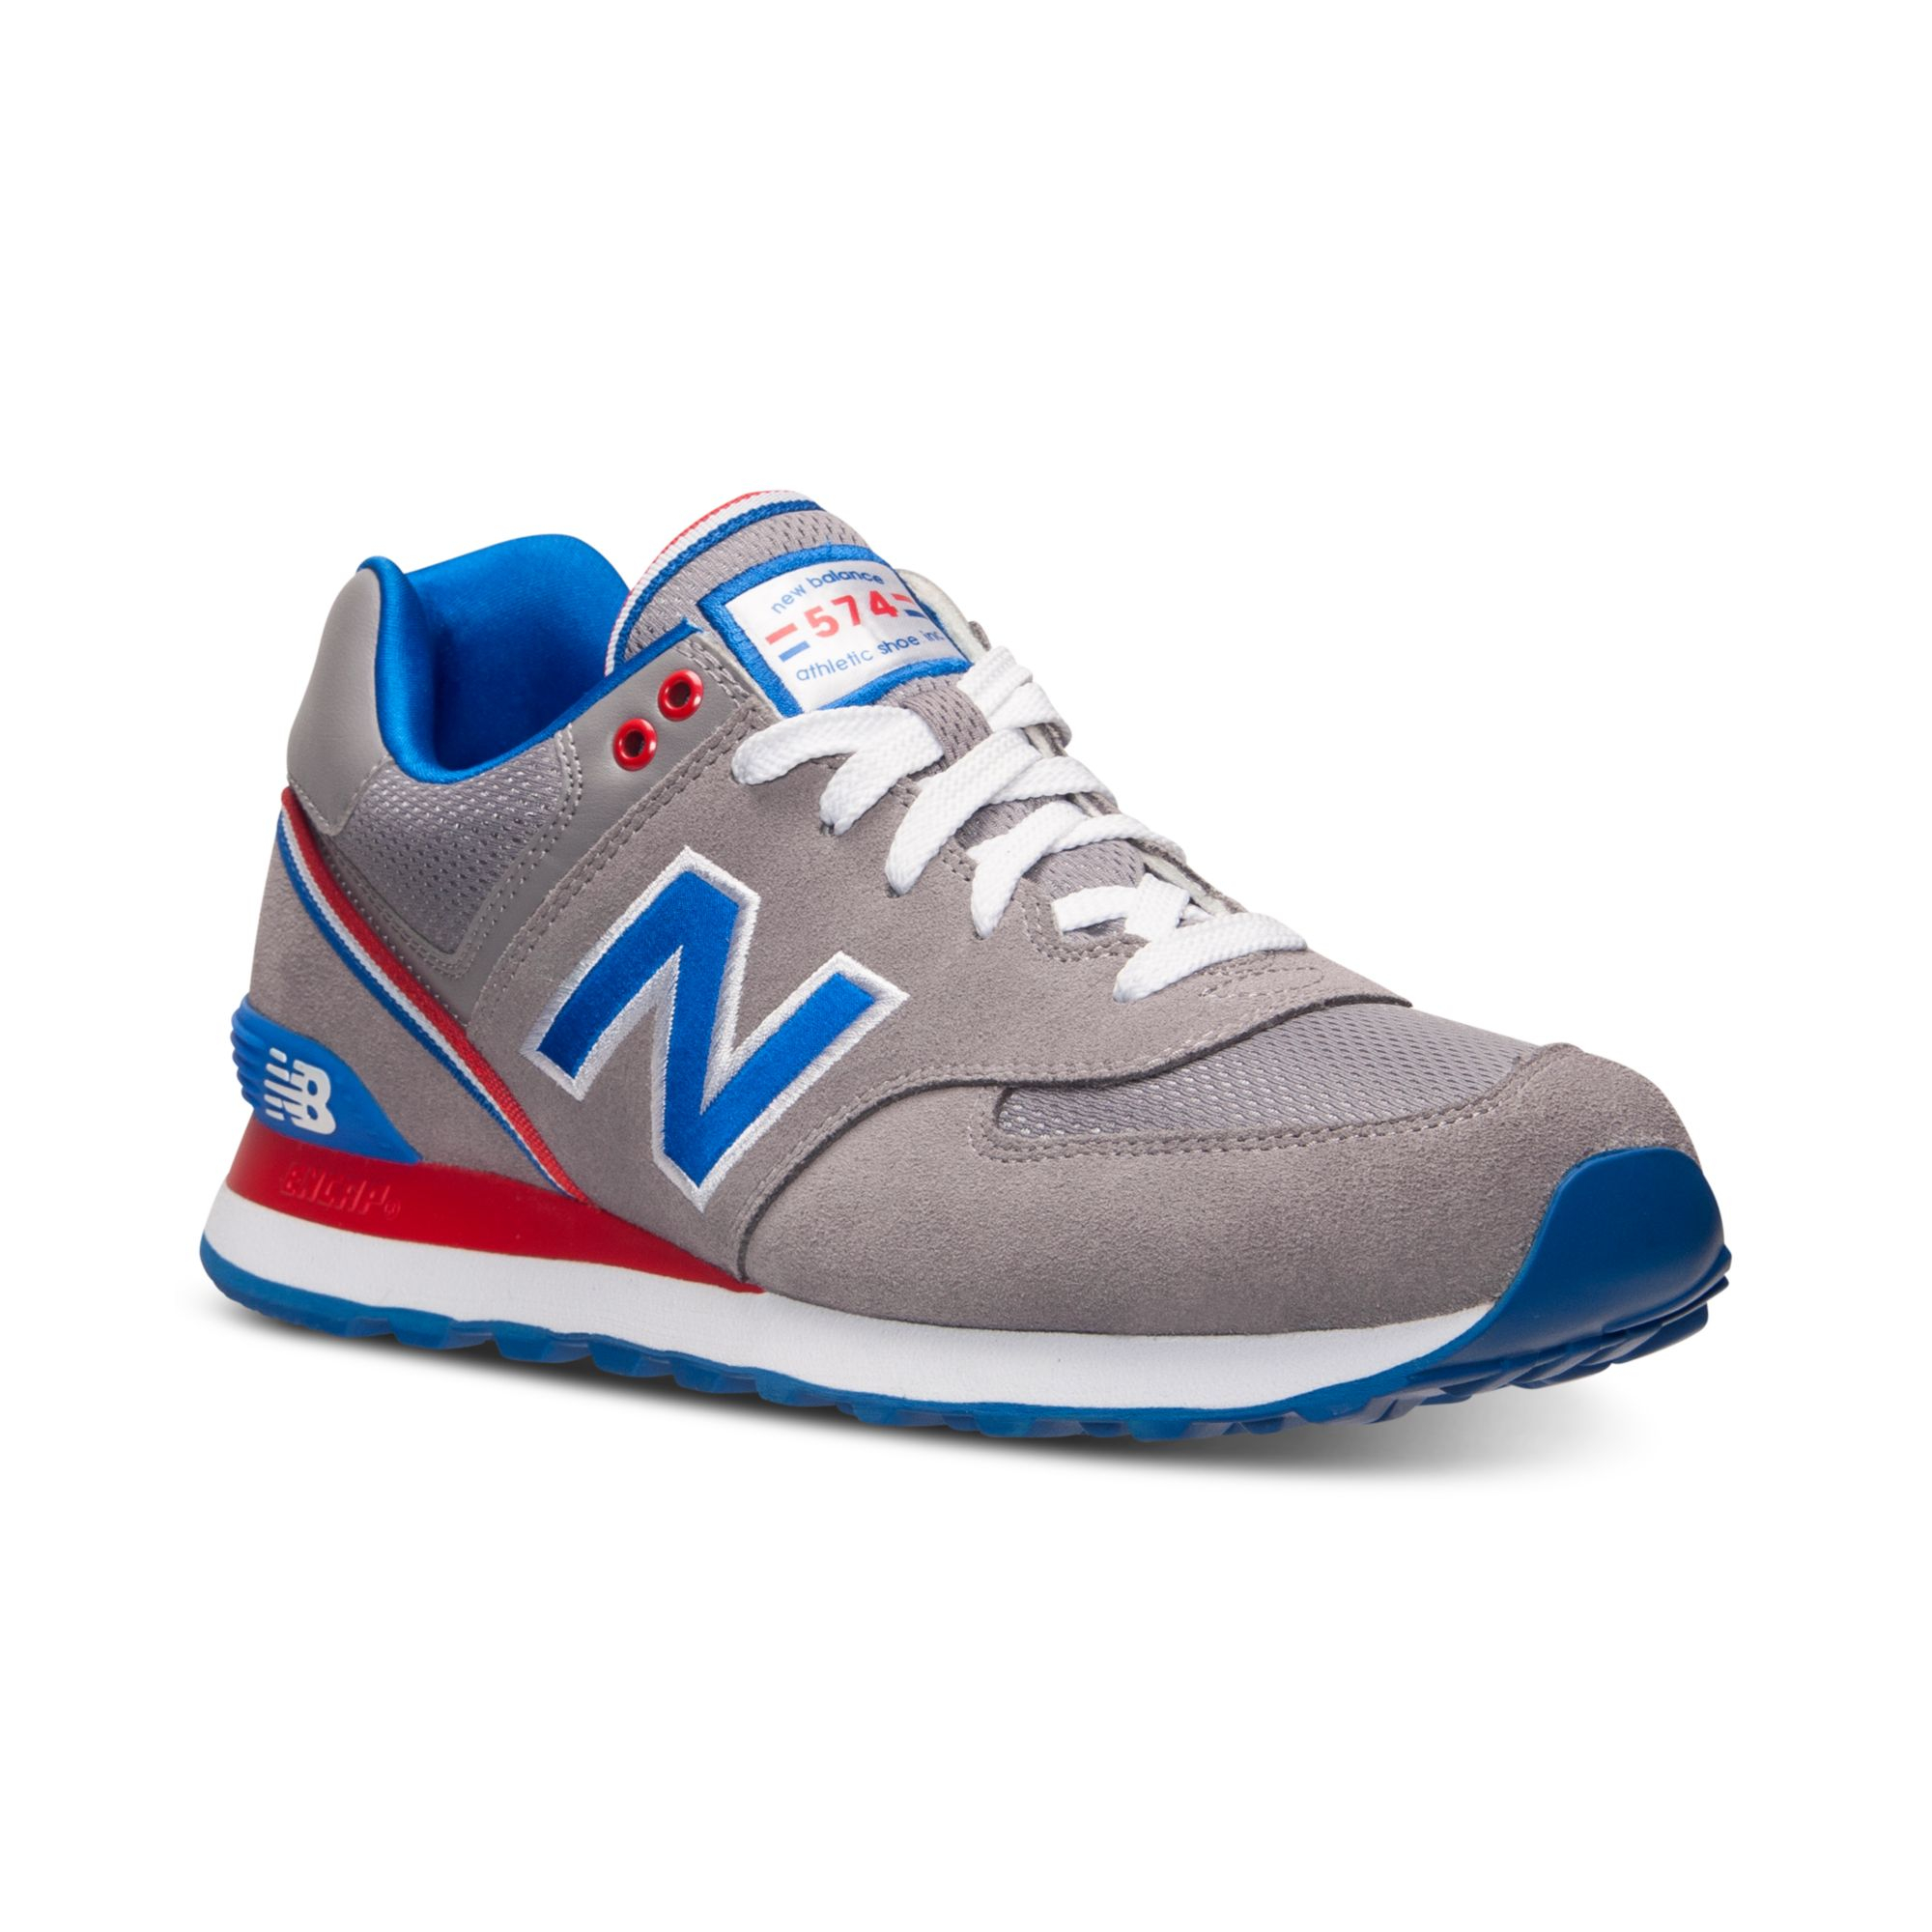 Lyst - New Balance Mens 574 Stadium Jacket Casual Sneakers From Finish ...